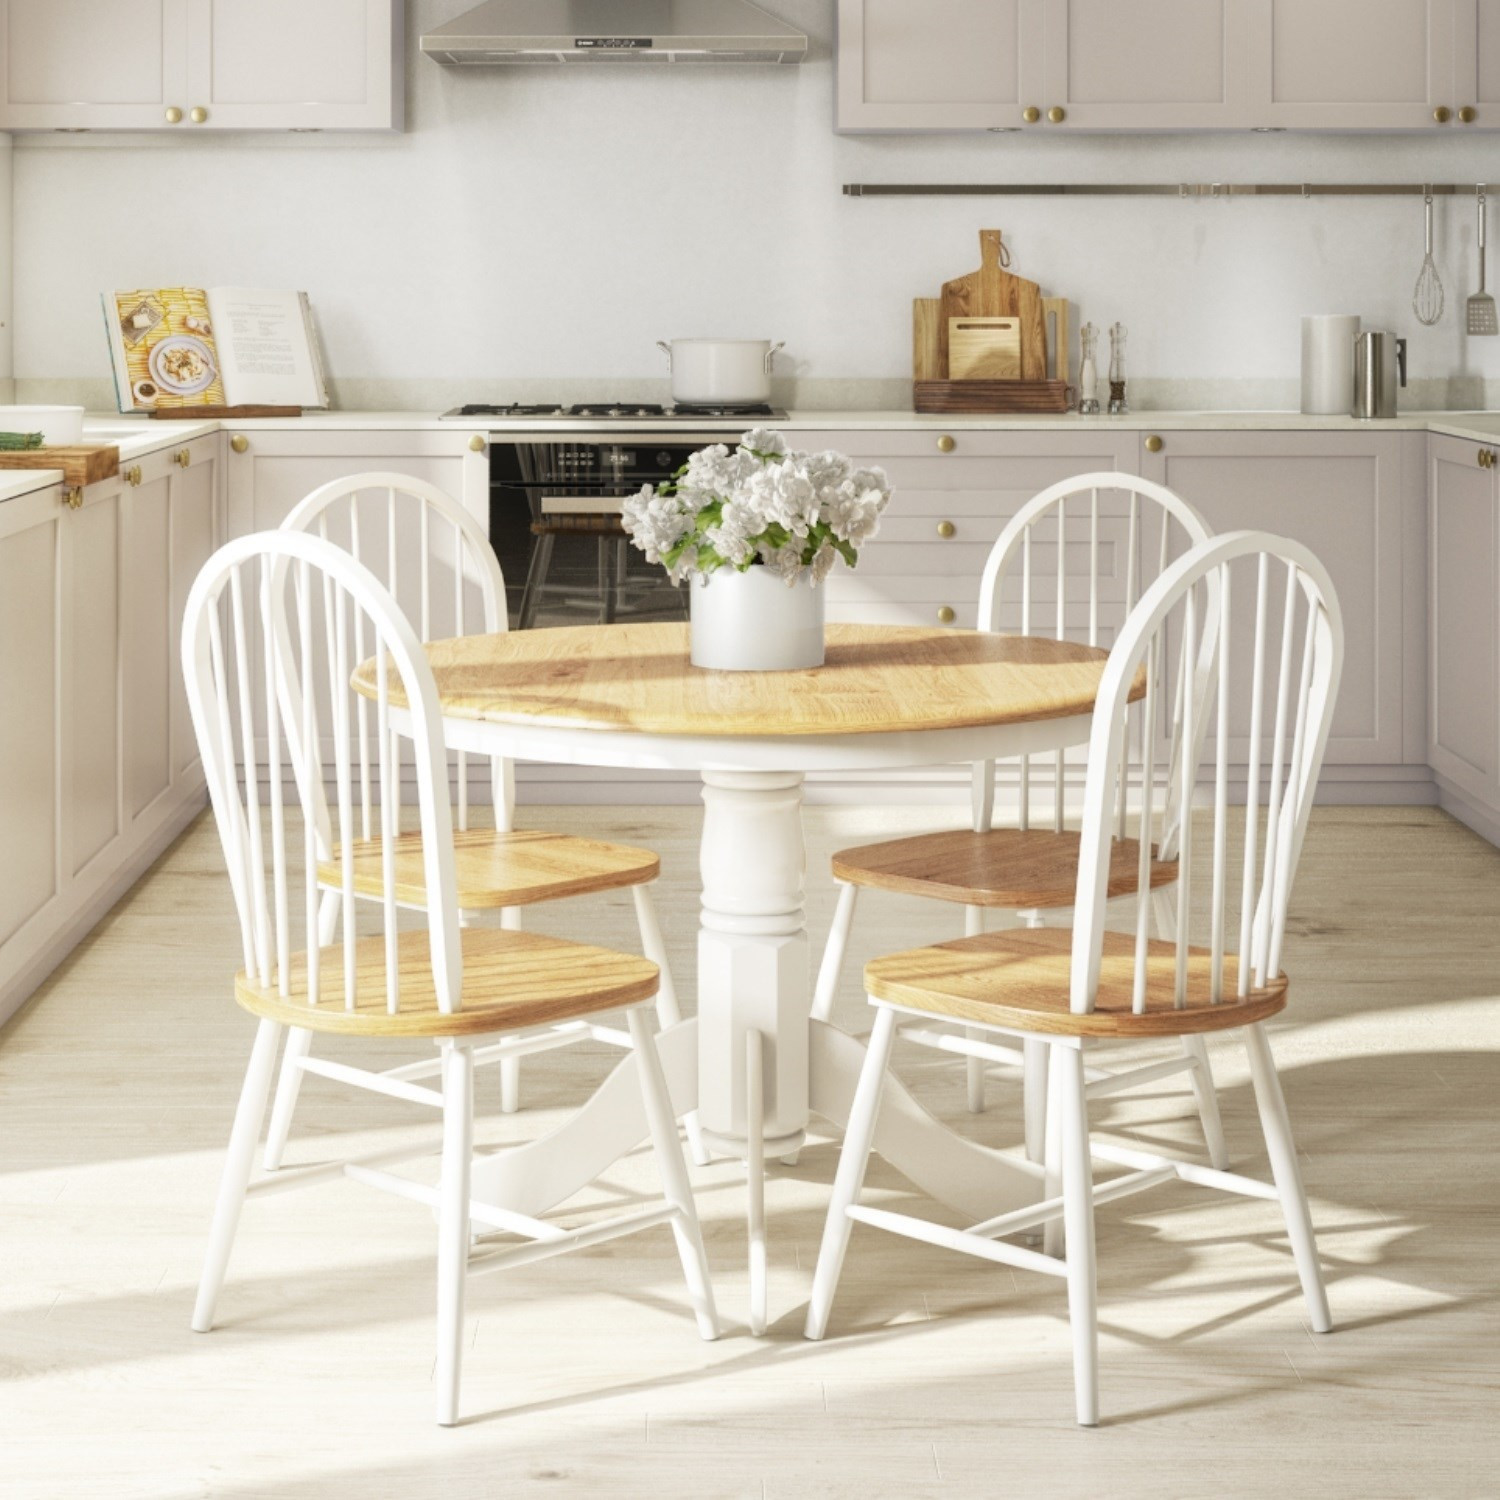 White Kitchen Table And Chairs
 Rhode Island Natural & White Round Kitchen Dining Table